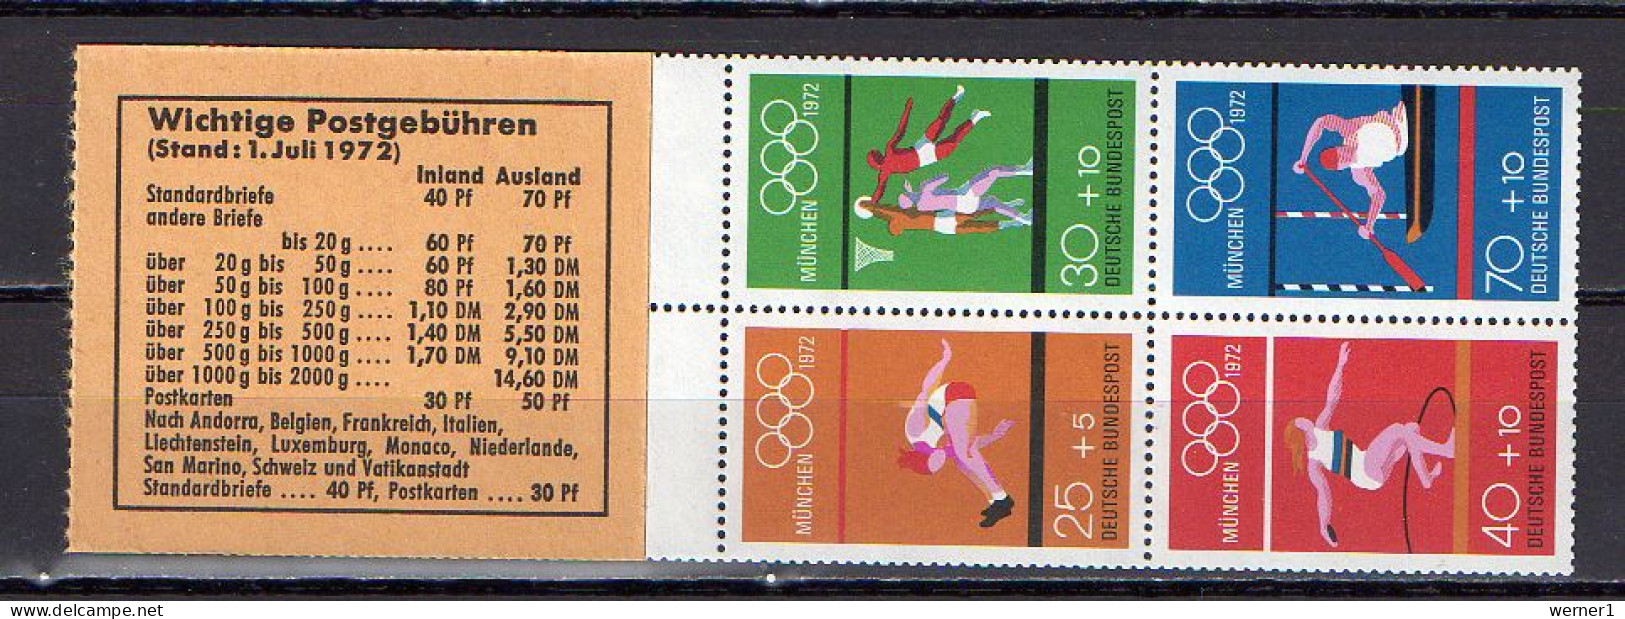 Germany 1972 Olympic Games Munich, Basketball, Rowing Etc. Stamp Booklet MNH - Sommer 1972: München